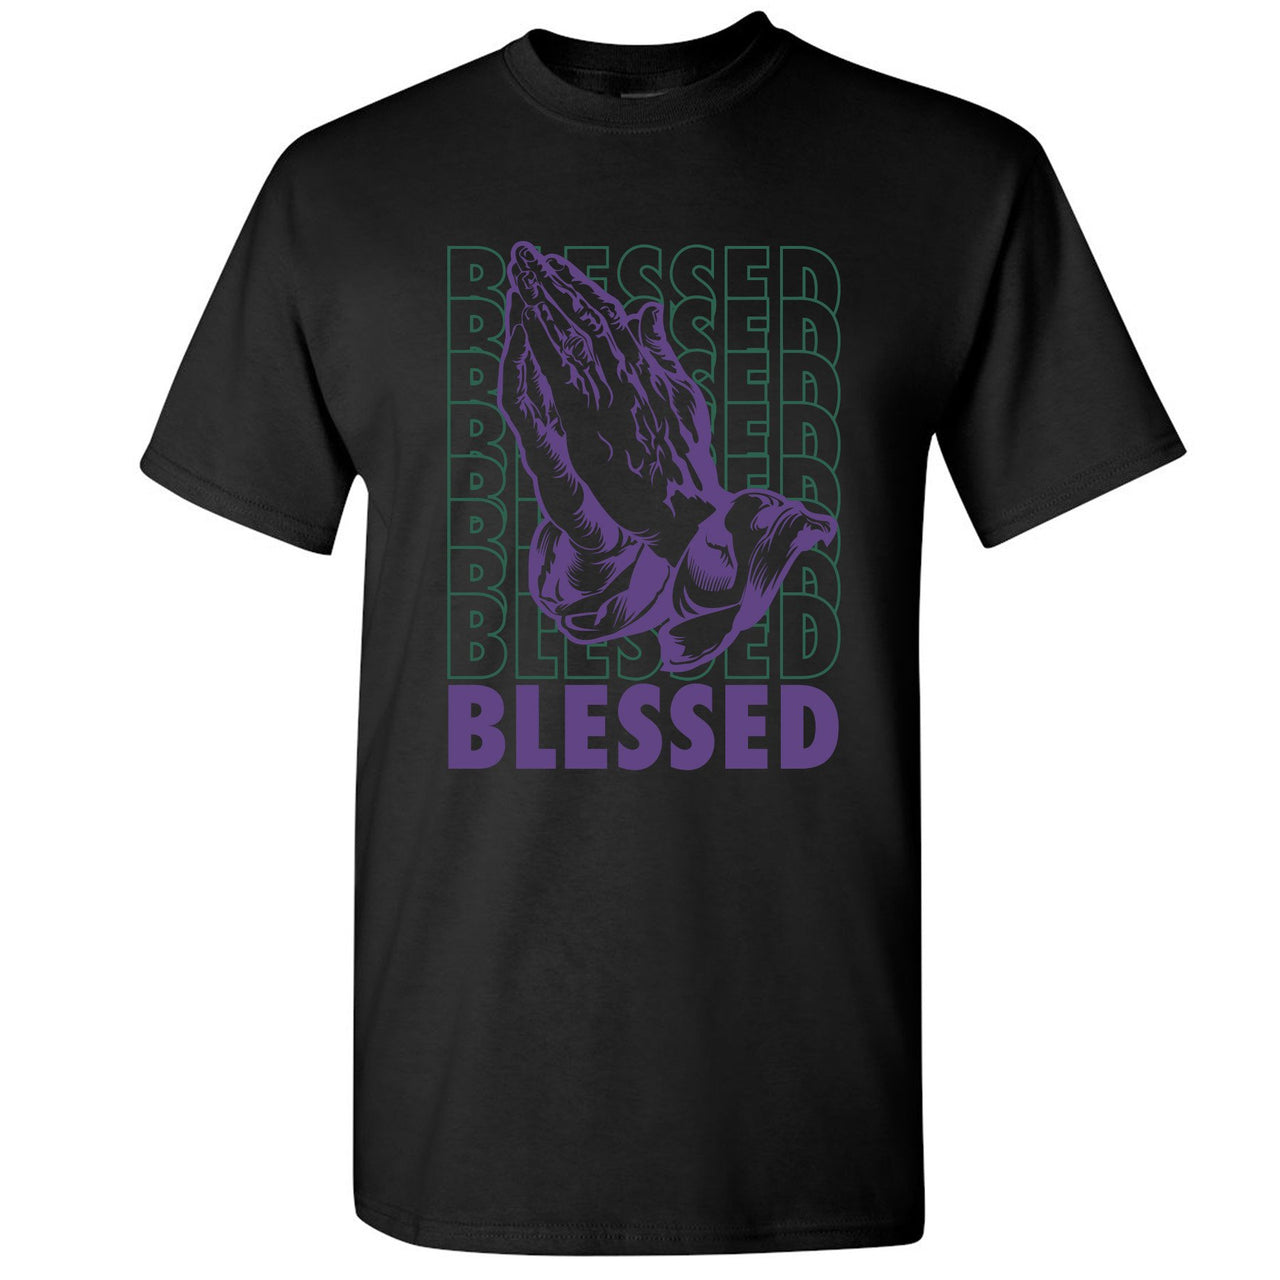 Ray Allen 7s Sneaker Hook Up Blessed Praying Hands Black T-Shirt